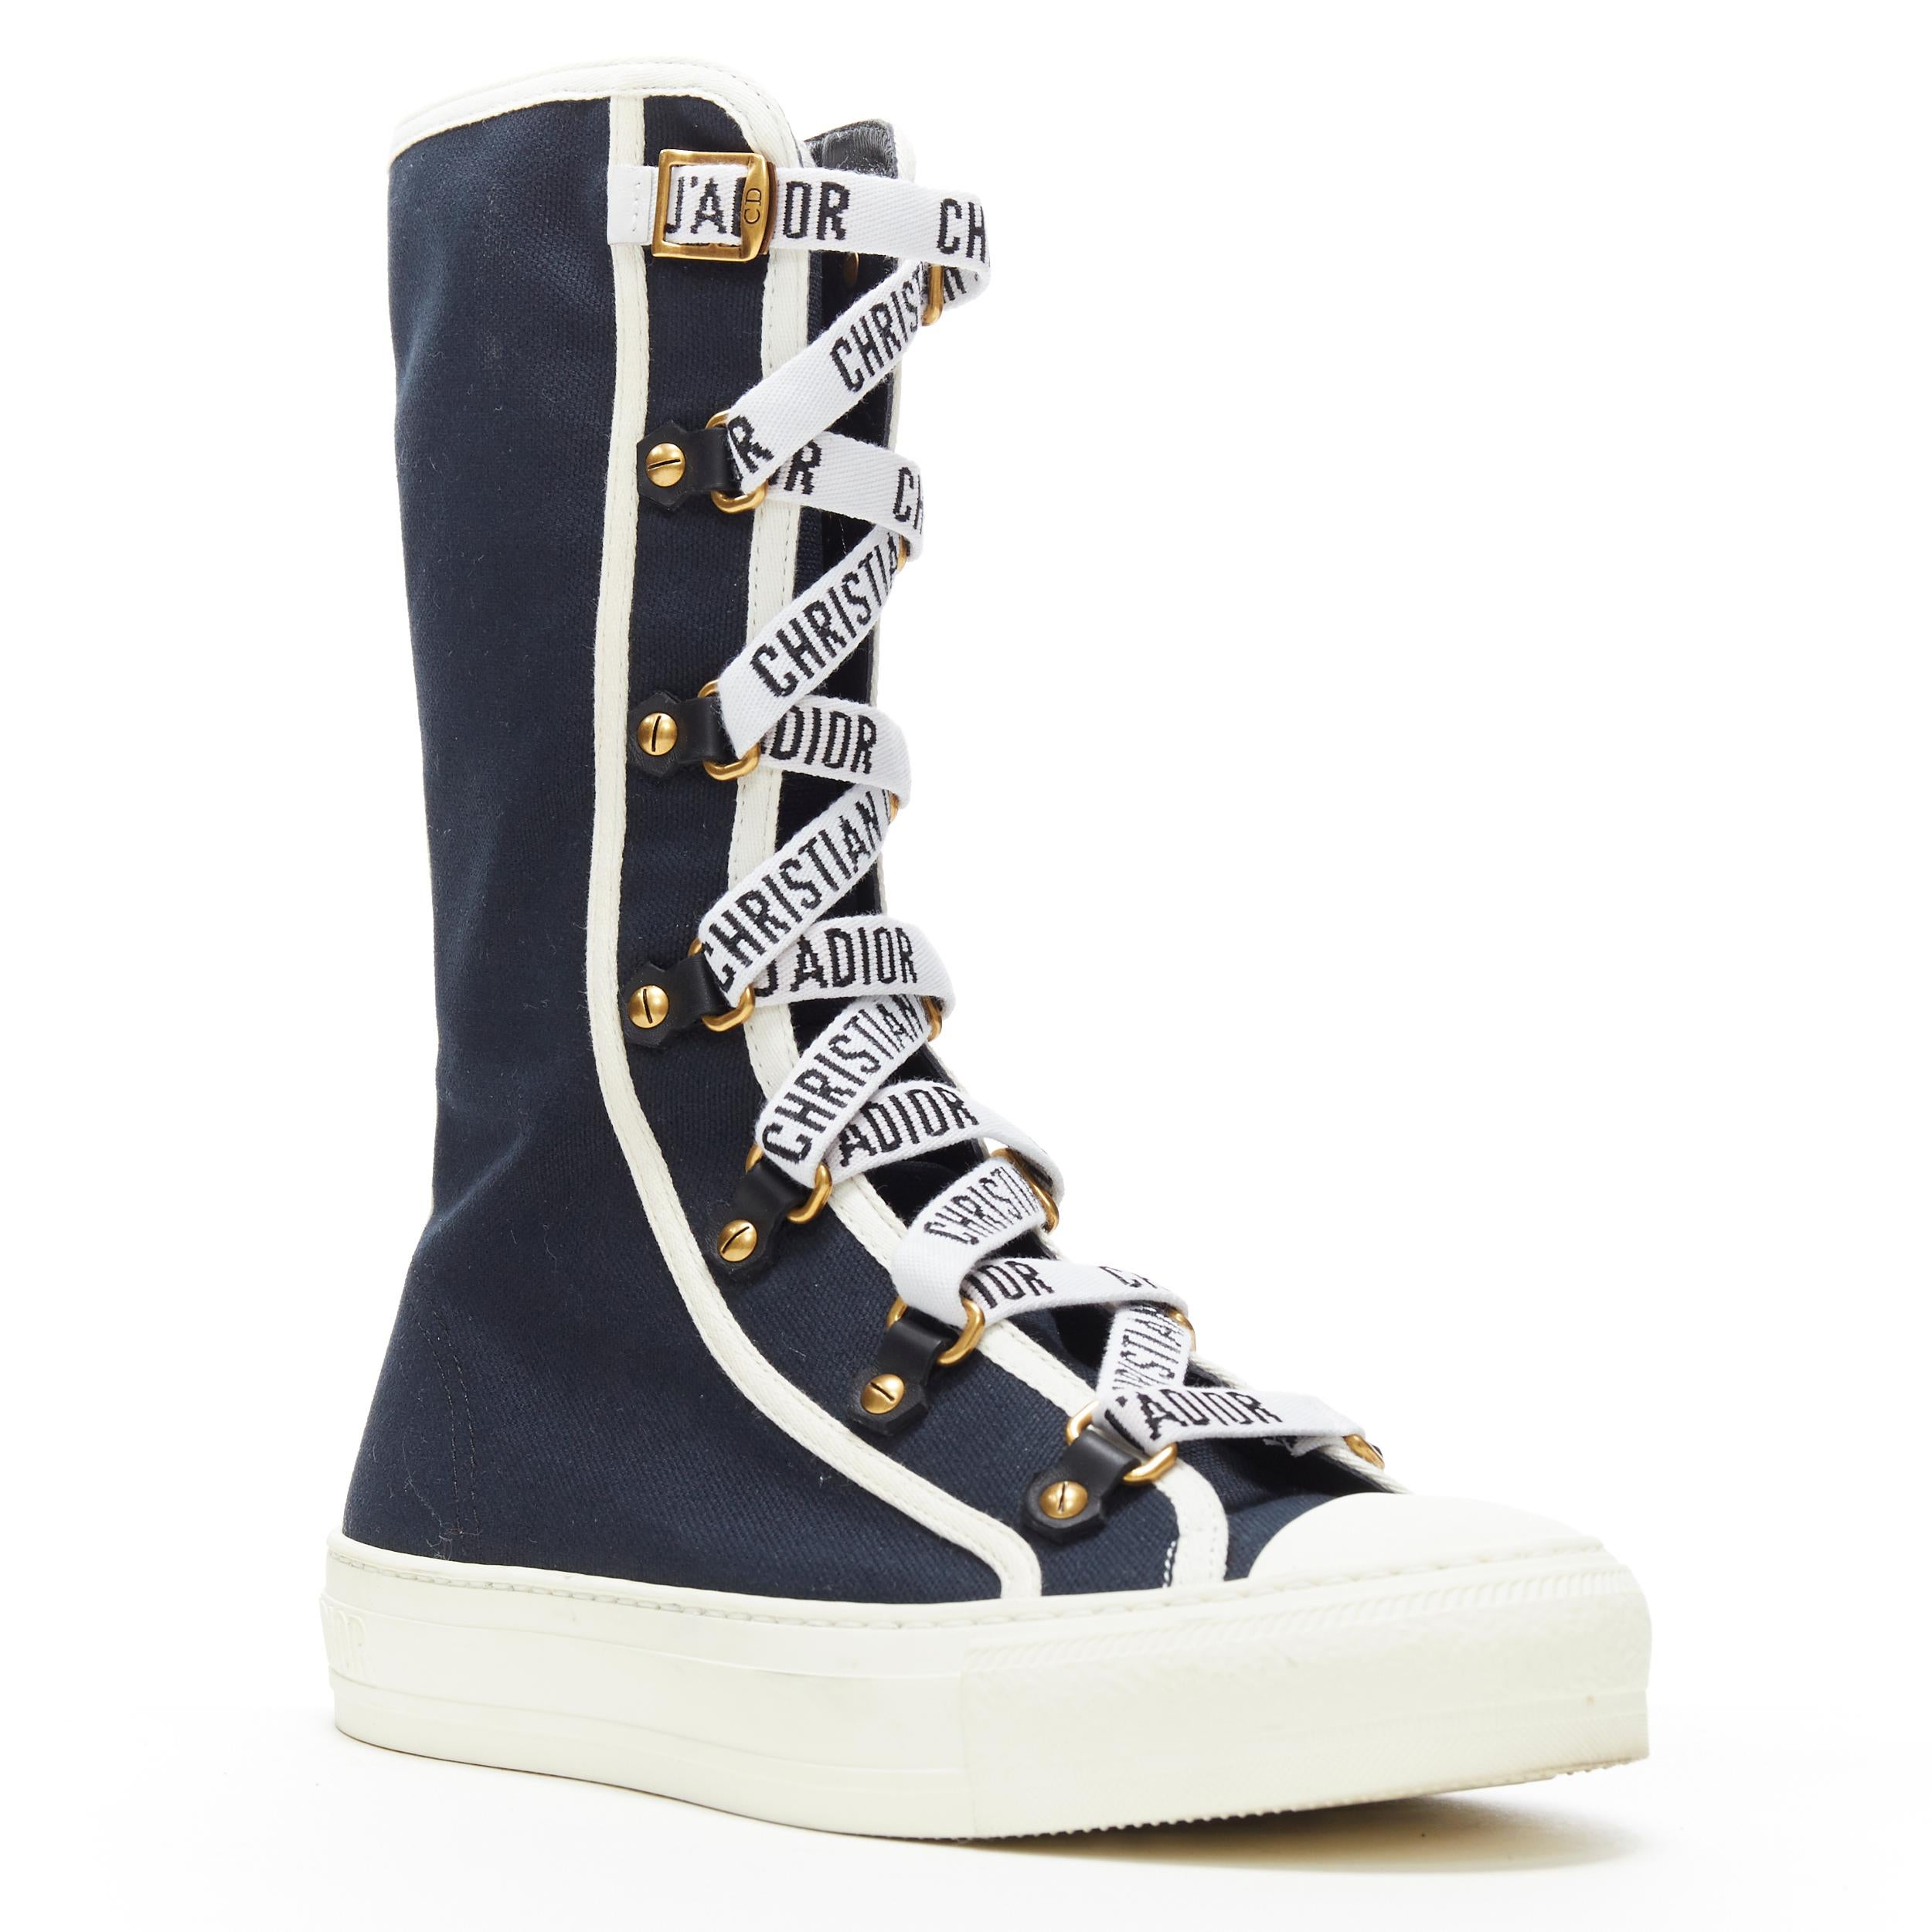 CHRISTIAN DIOR J'adior Walk'n'Dior mid calf navy canvas flat sneaker boot EU37.5
Brand: Christian Dior
Designer: Maria Grazia
Collection: 2019
Model Name / Style: Walk N Dior boots
Material: Fabric
Color: Navy
Pattern: Solid
Closure: Zip
Lining